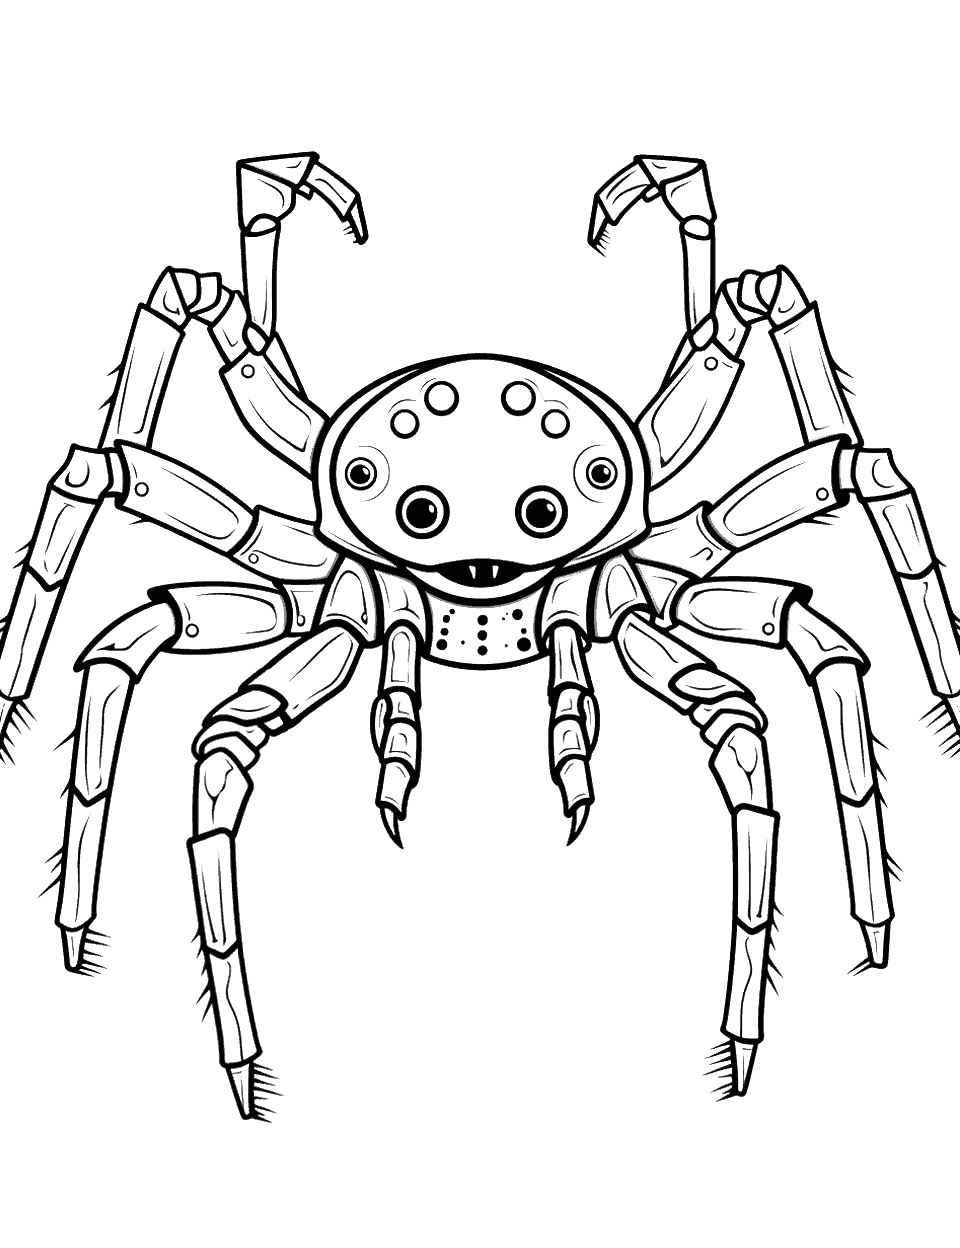 Robot Spider Creation Coloring Page - A mechanical spider with metal legs.